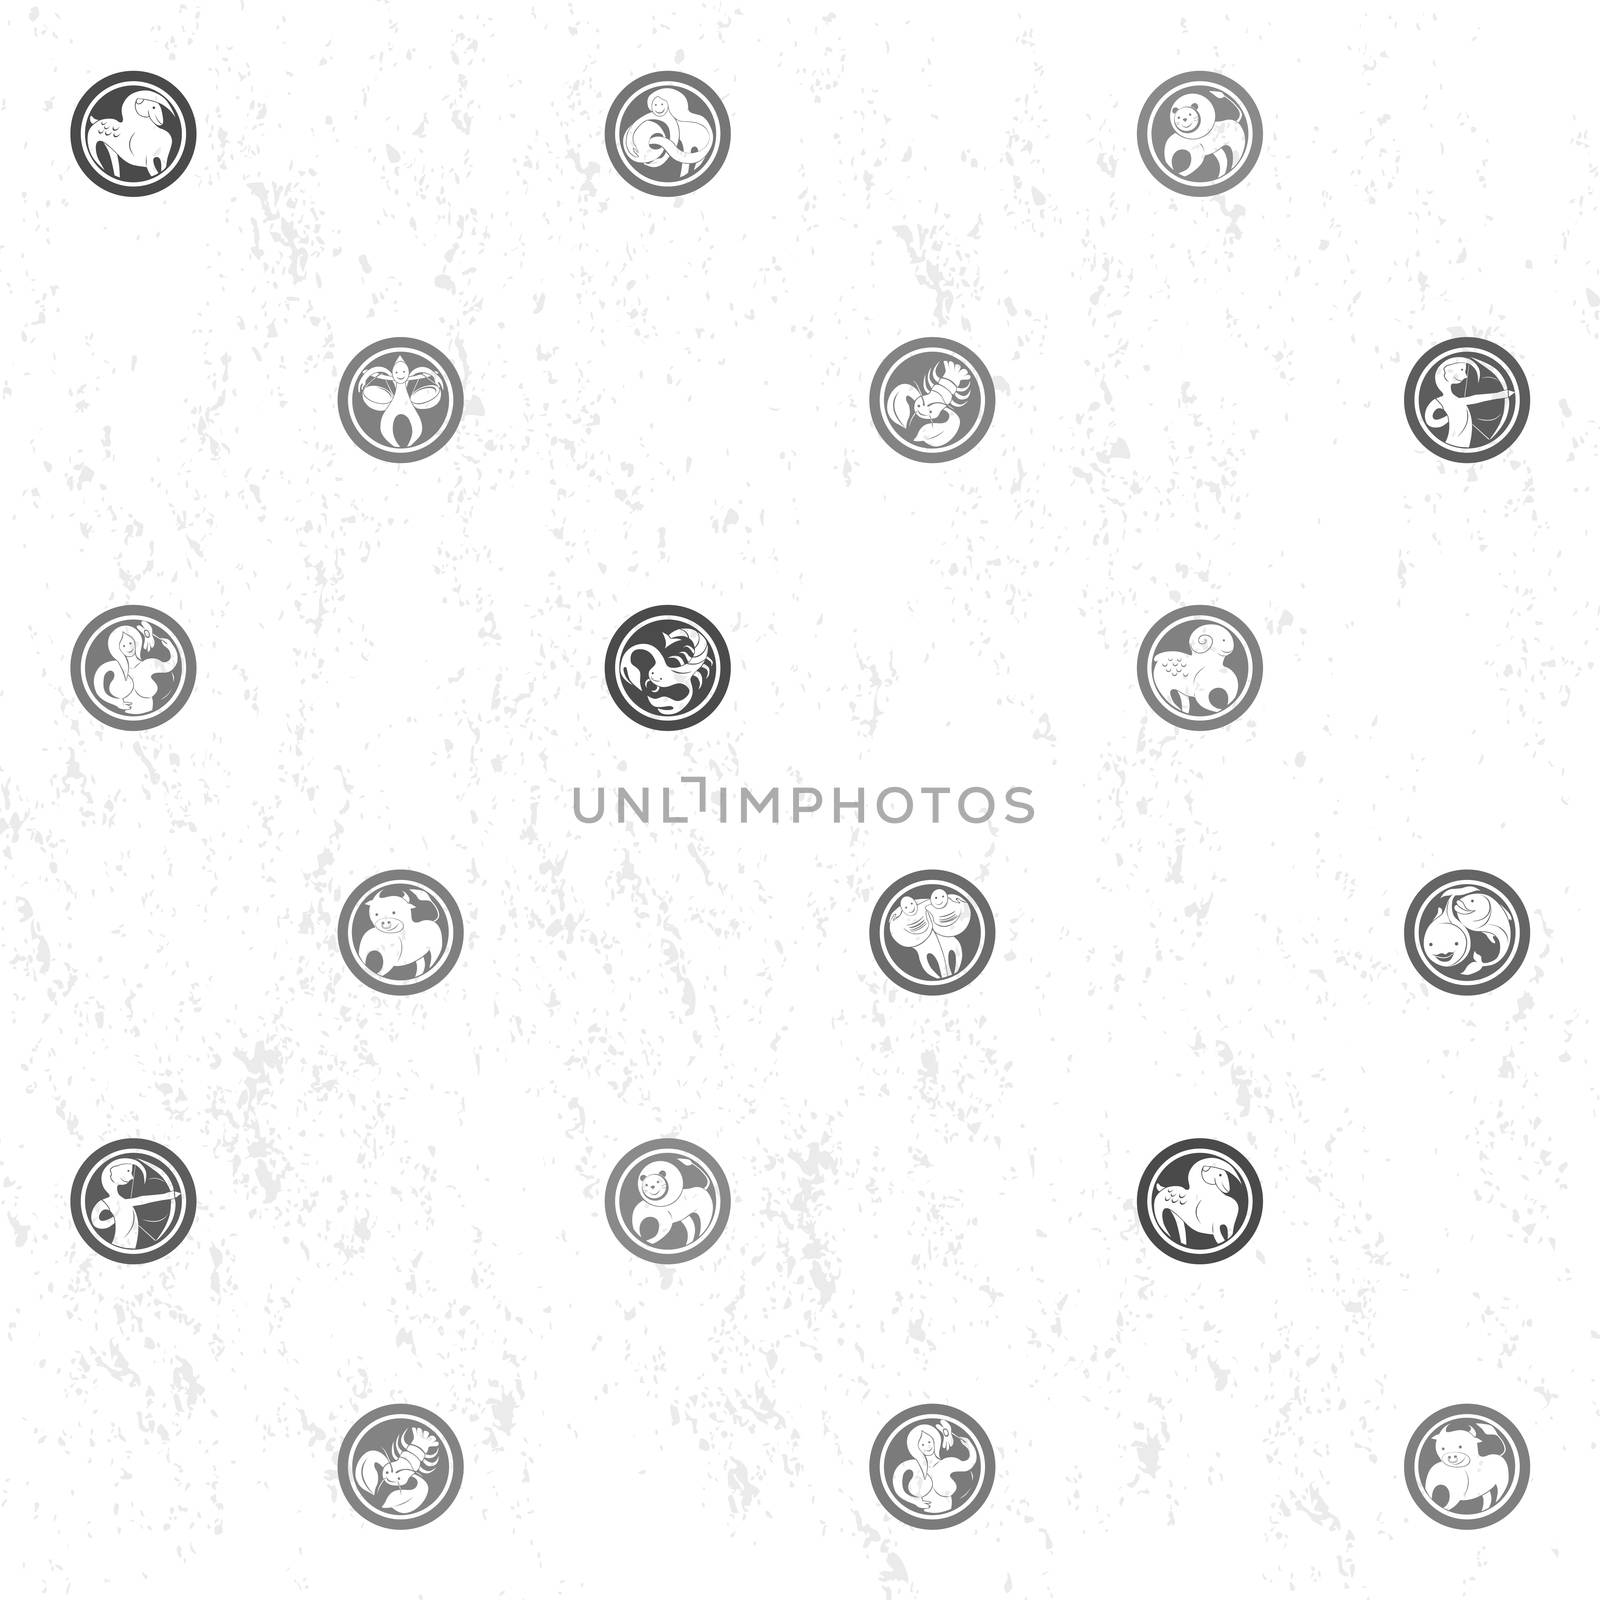 Black and white sparse pattern with zodiac signs, cartoon illustrations over a grungy background